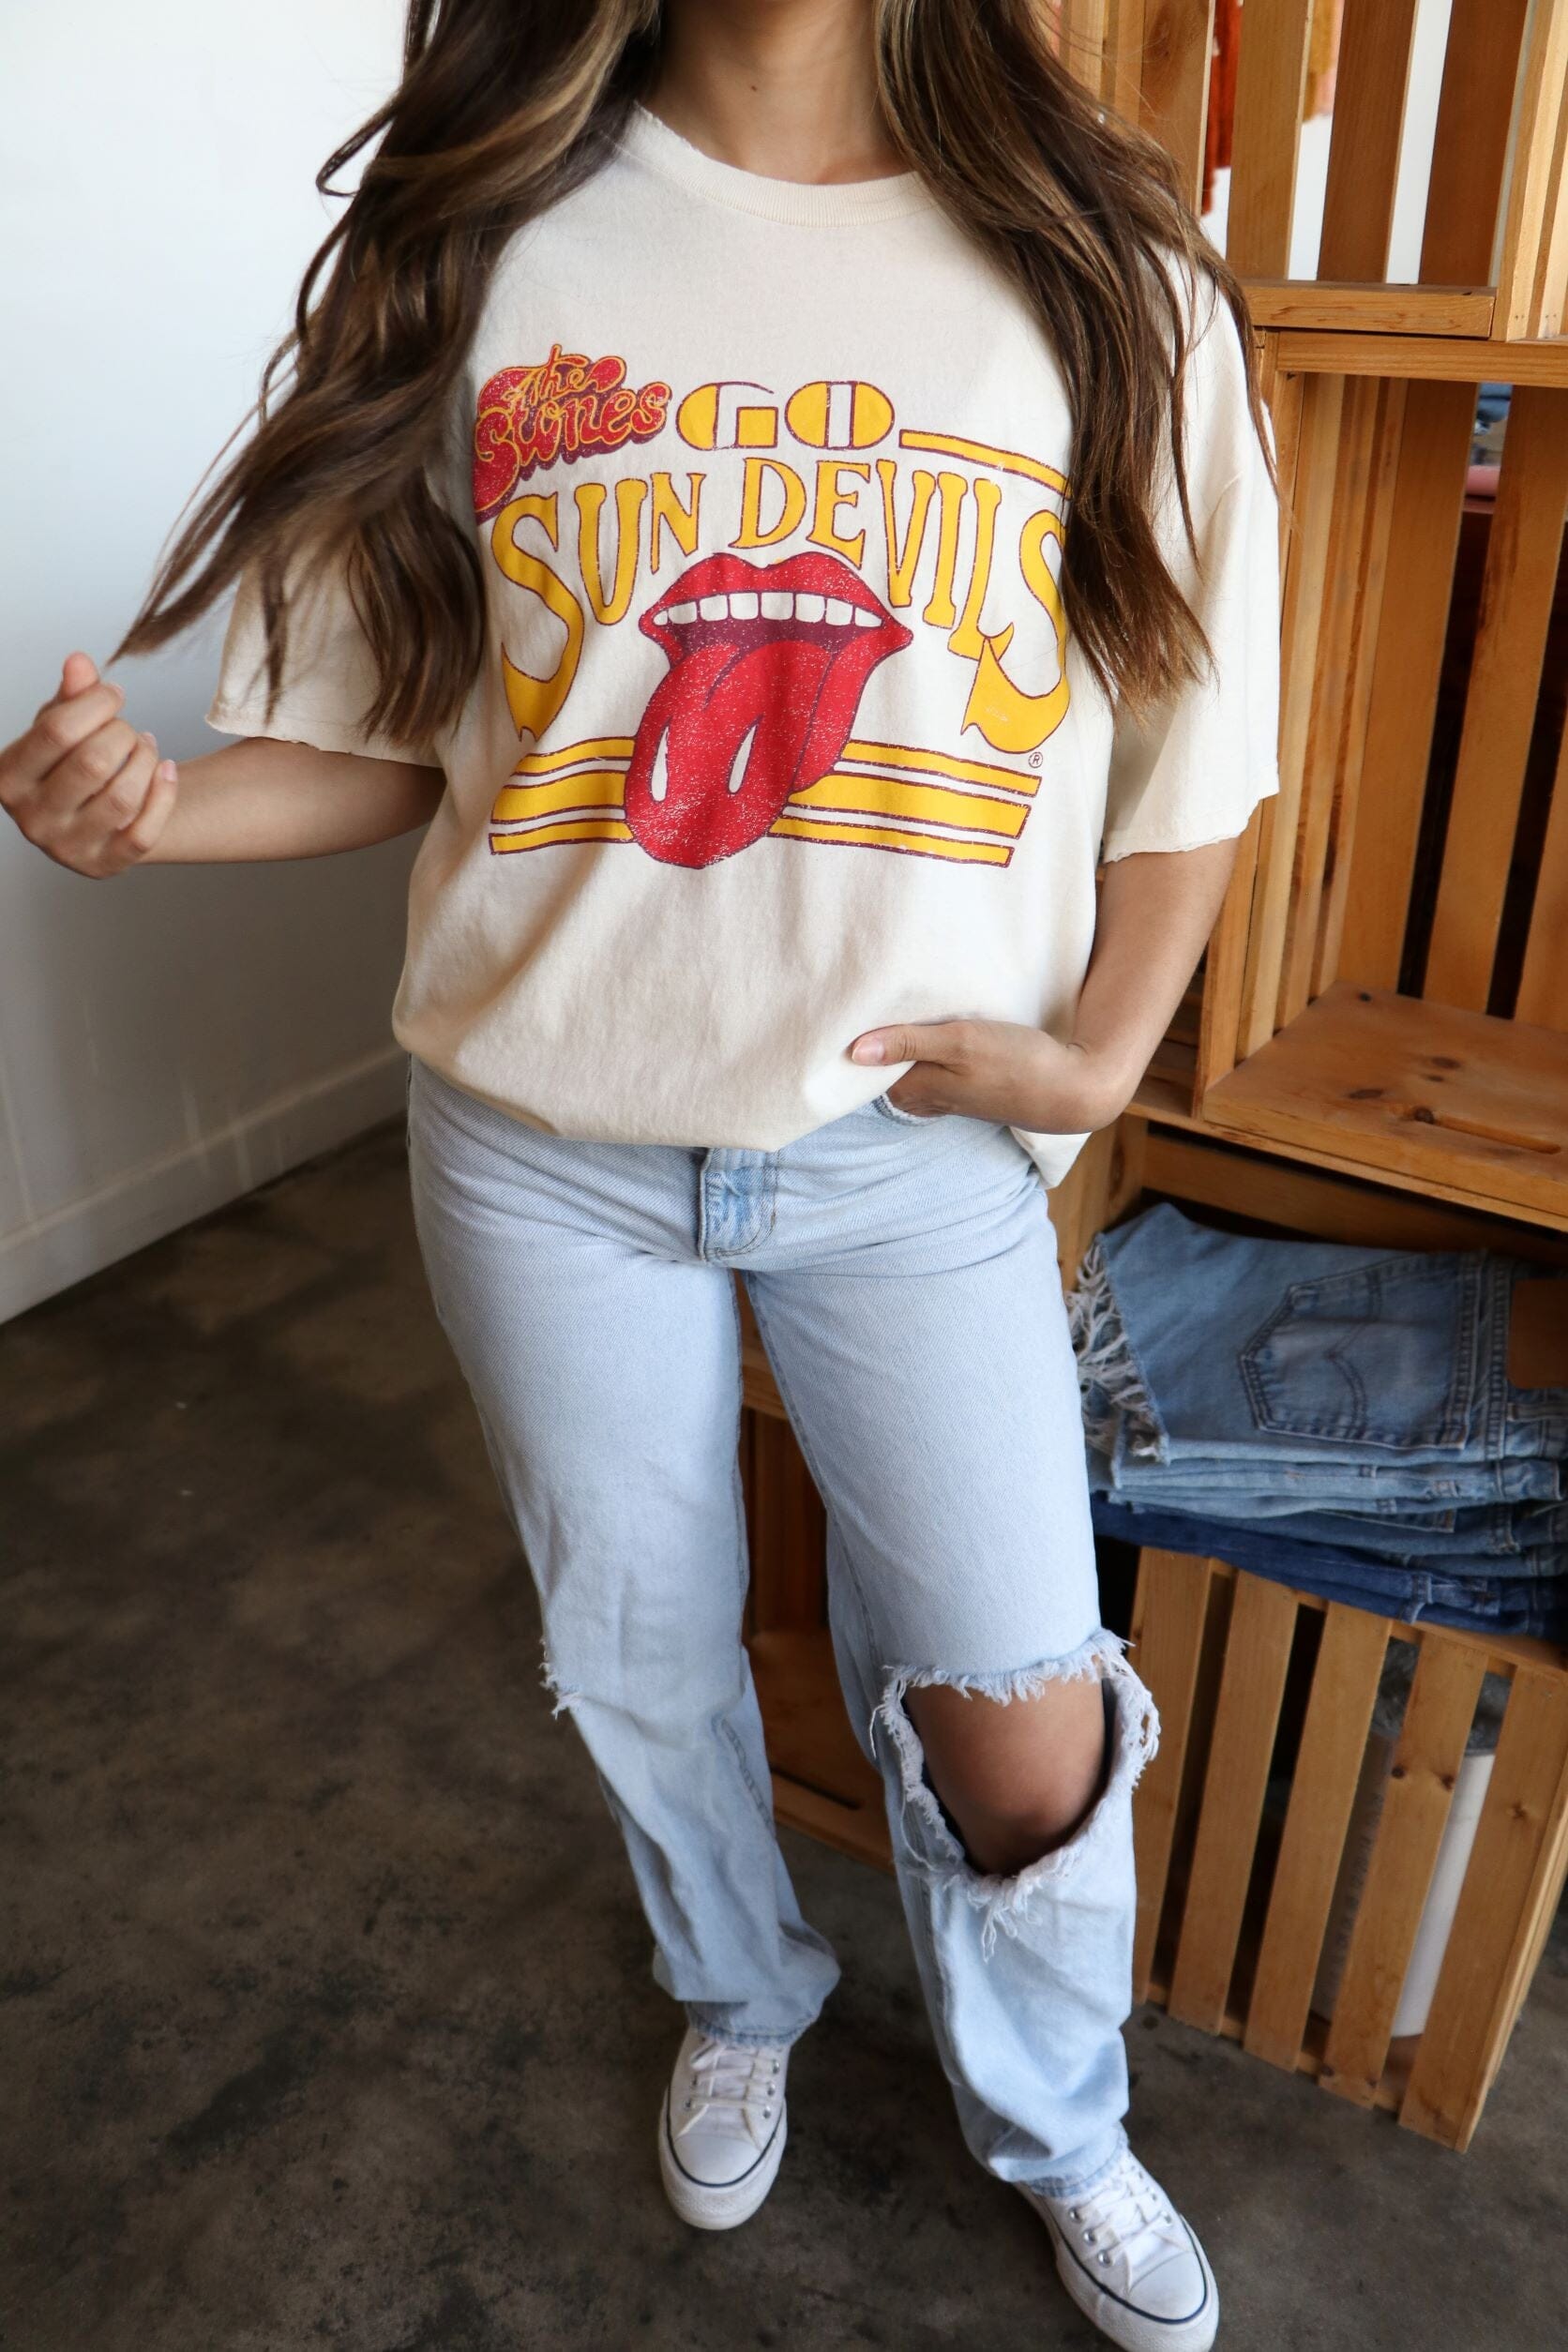 Rolling Stones Sun Devils Stoned Off White Thrifted Tee